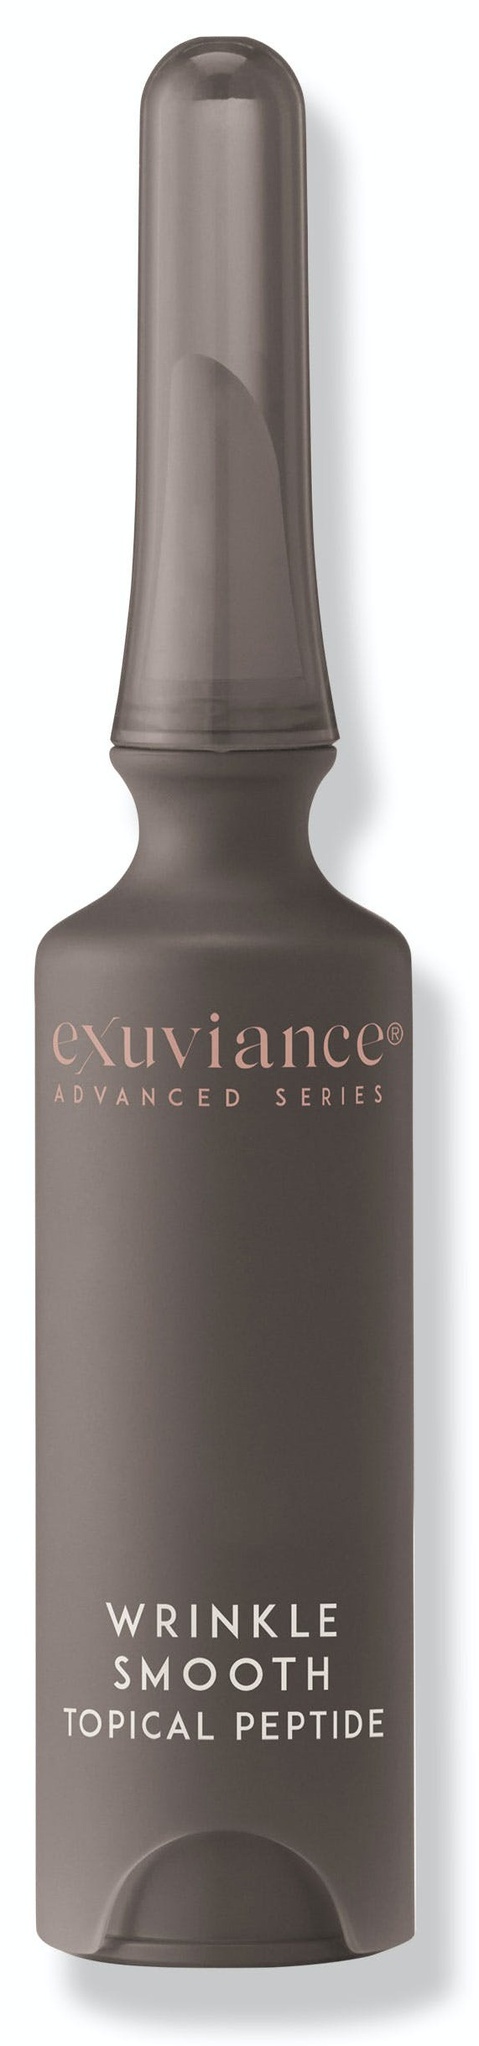 Exuviance Wrinkle Smooth Topical Peptide